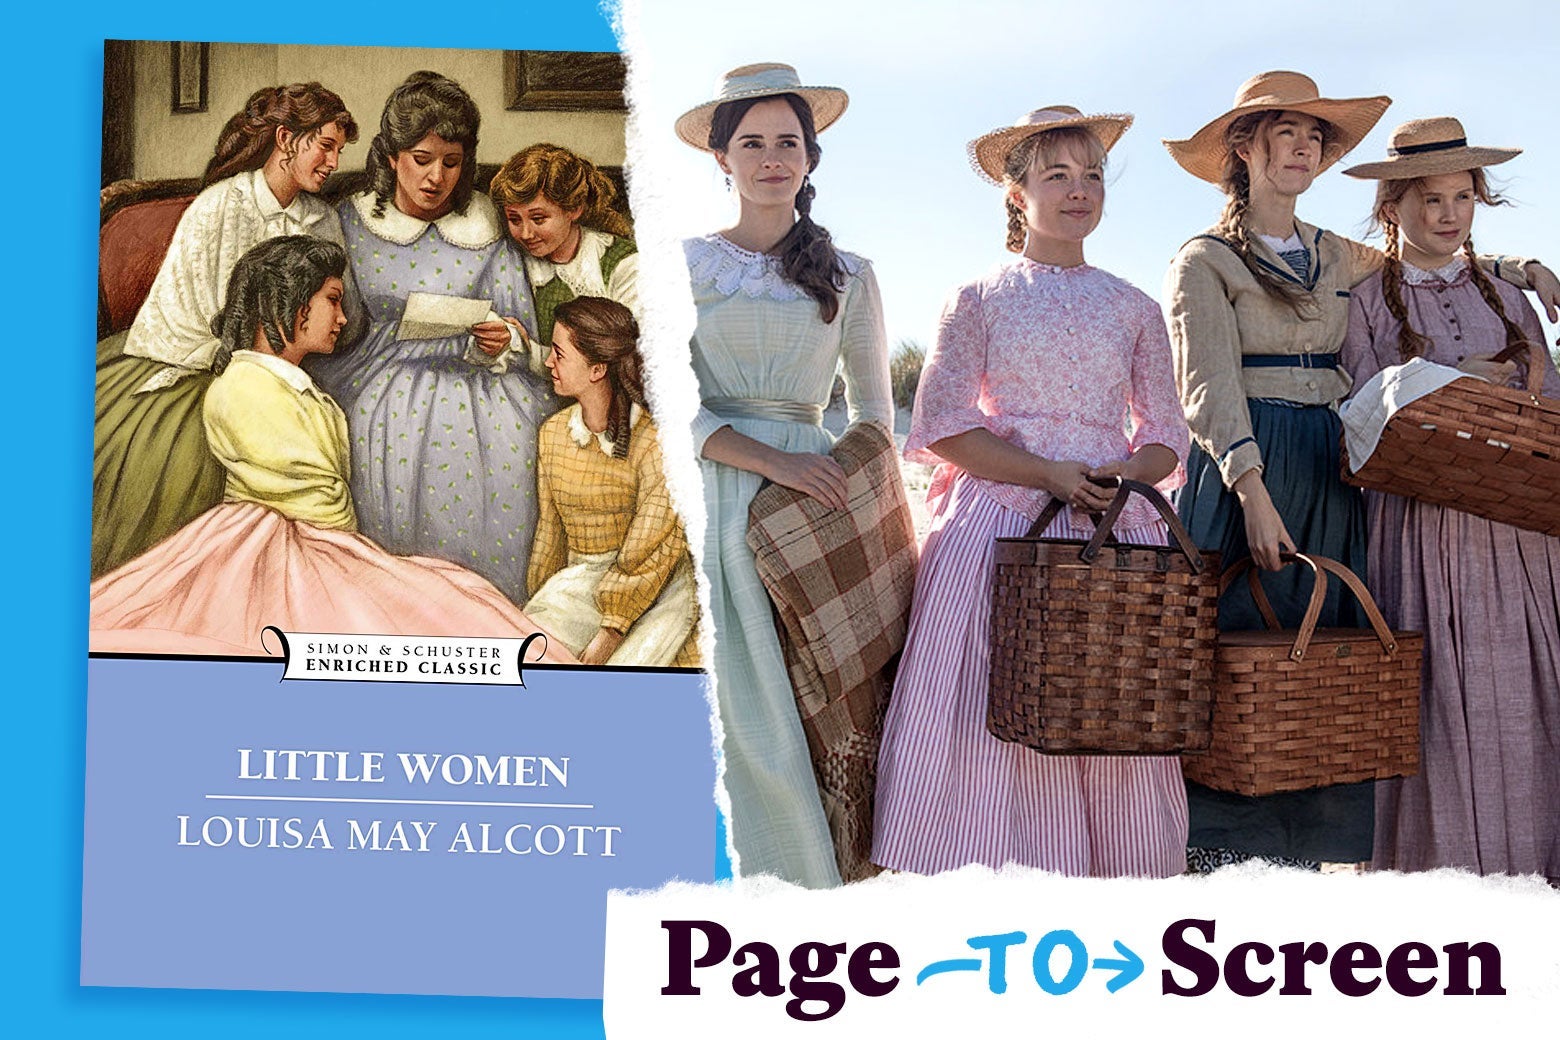 Photo illustration of the Little Women book and a still from the 2019 adaptation.